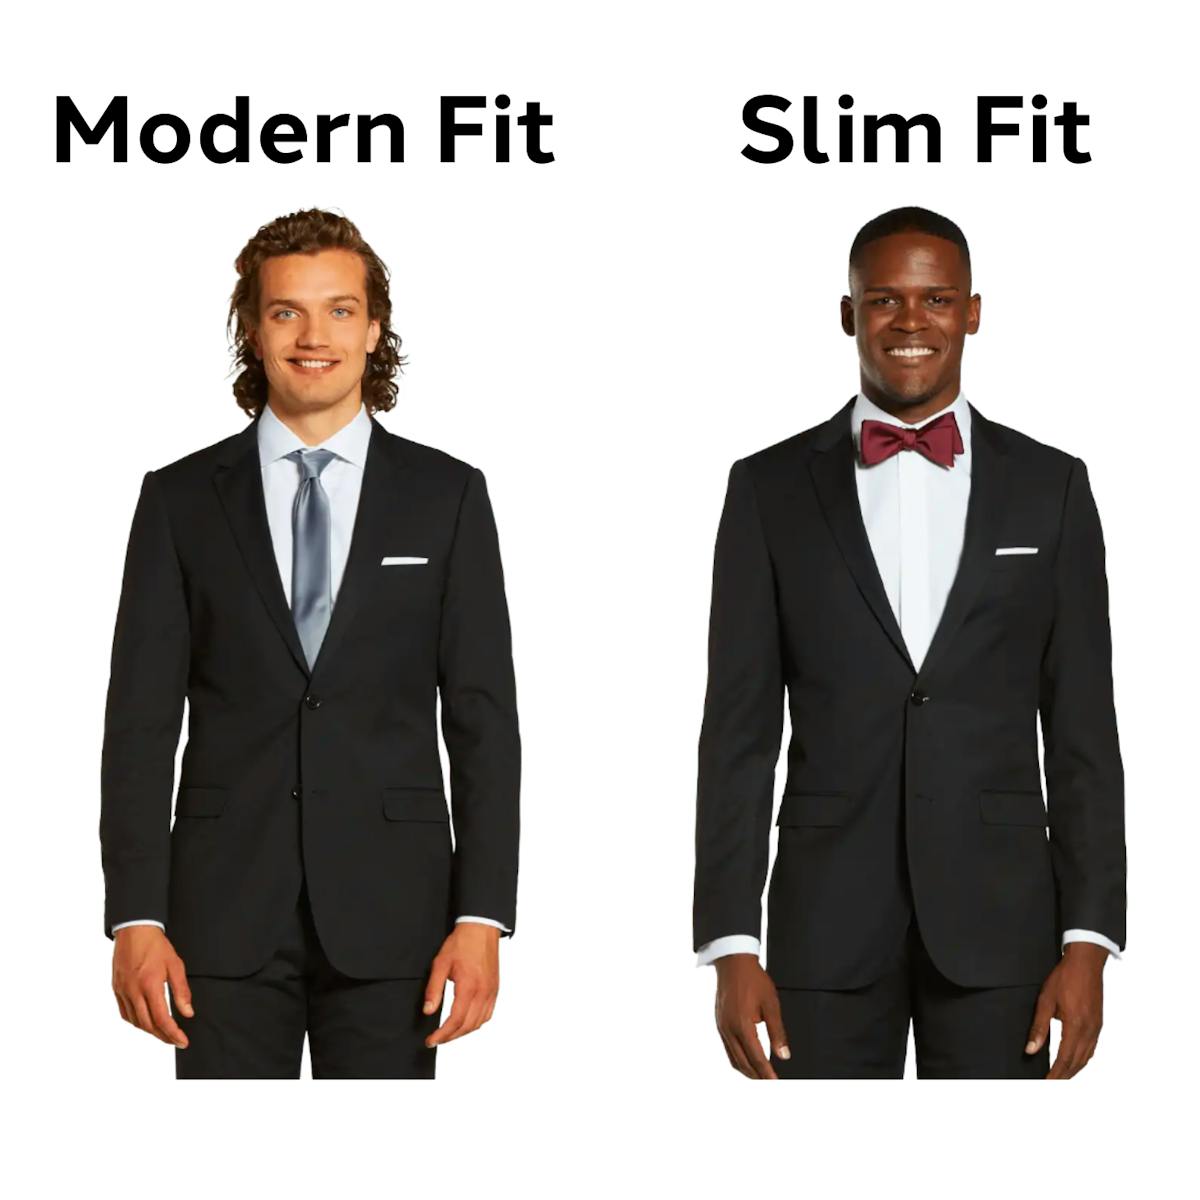 Three Things You Need To Know To Find A Well Fitted Suit